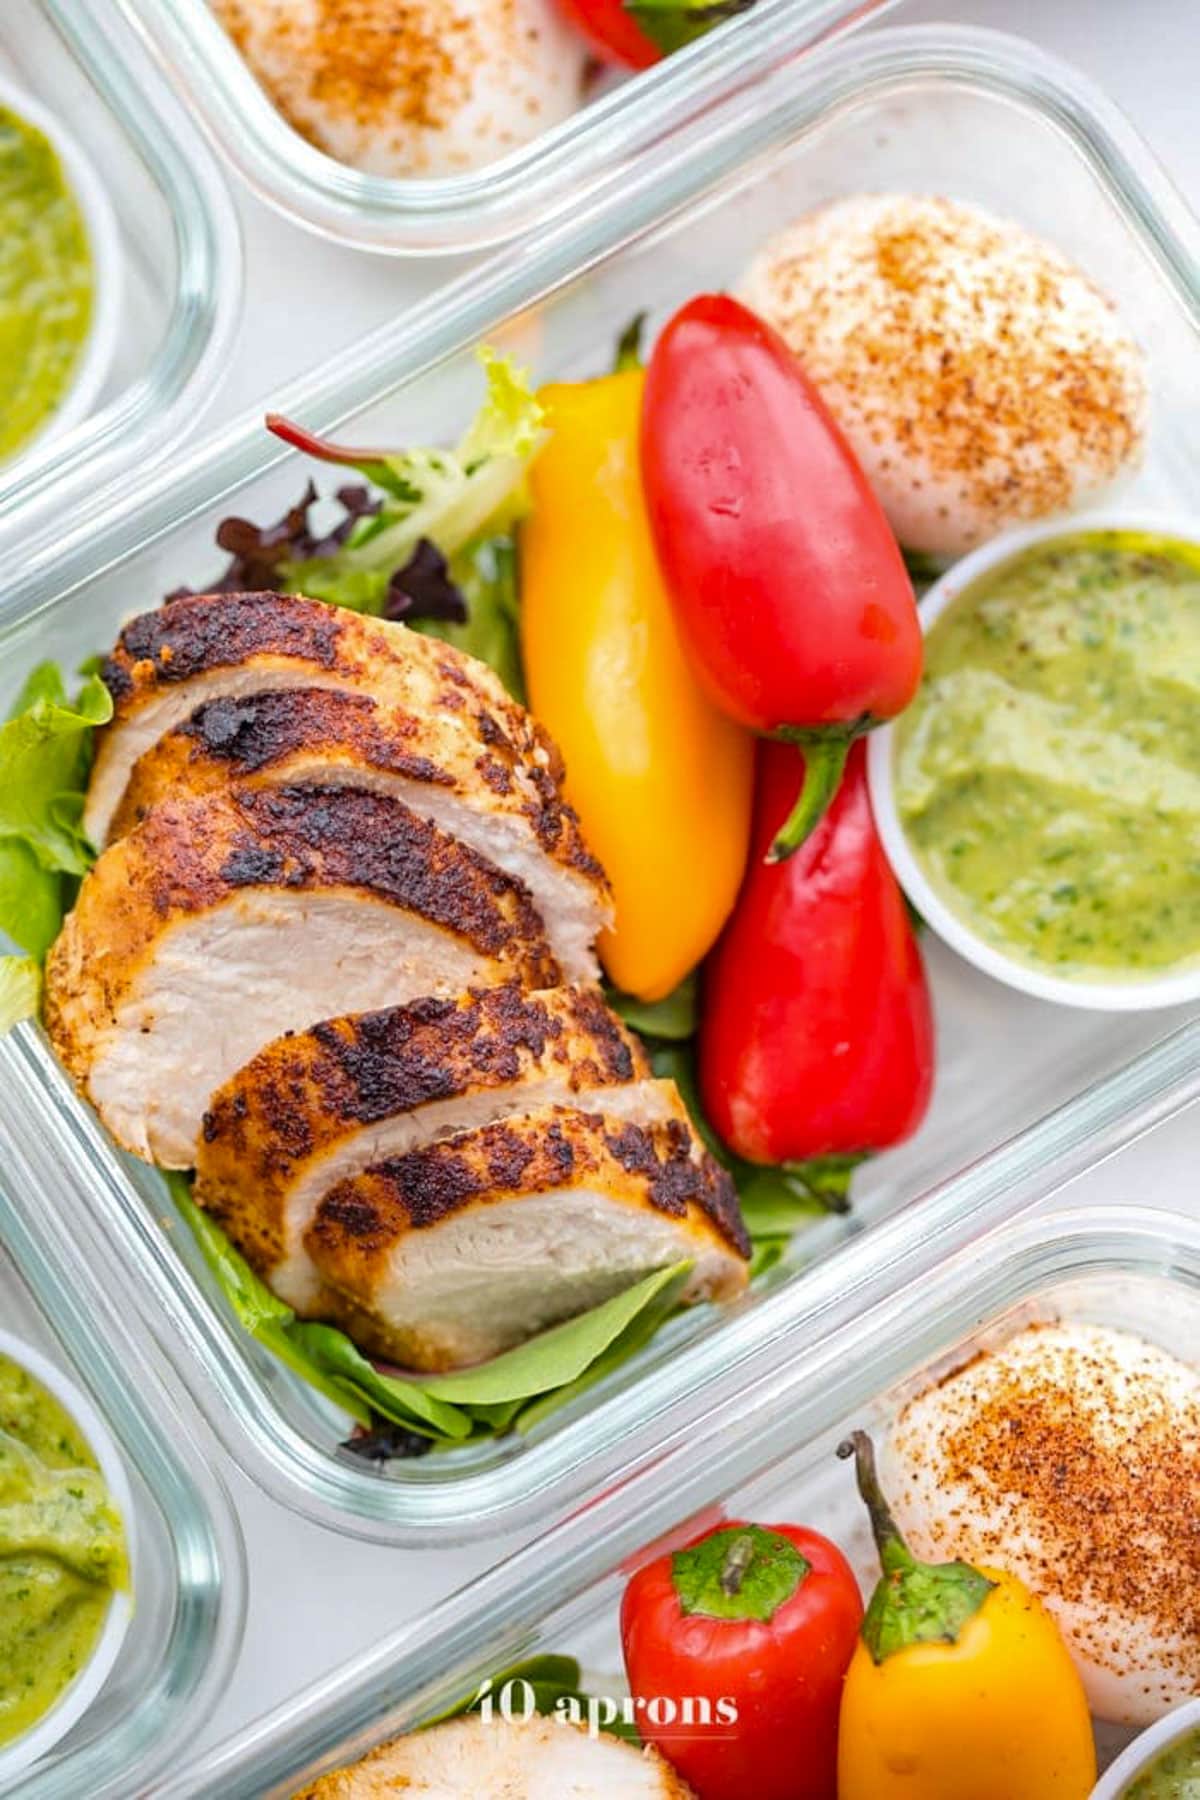 A glass meal prep container with sliced grilled chicken, bright red and yellow peppers, guacamole, and a bed of lettuce.